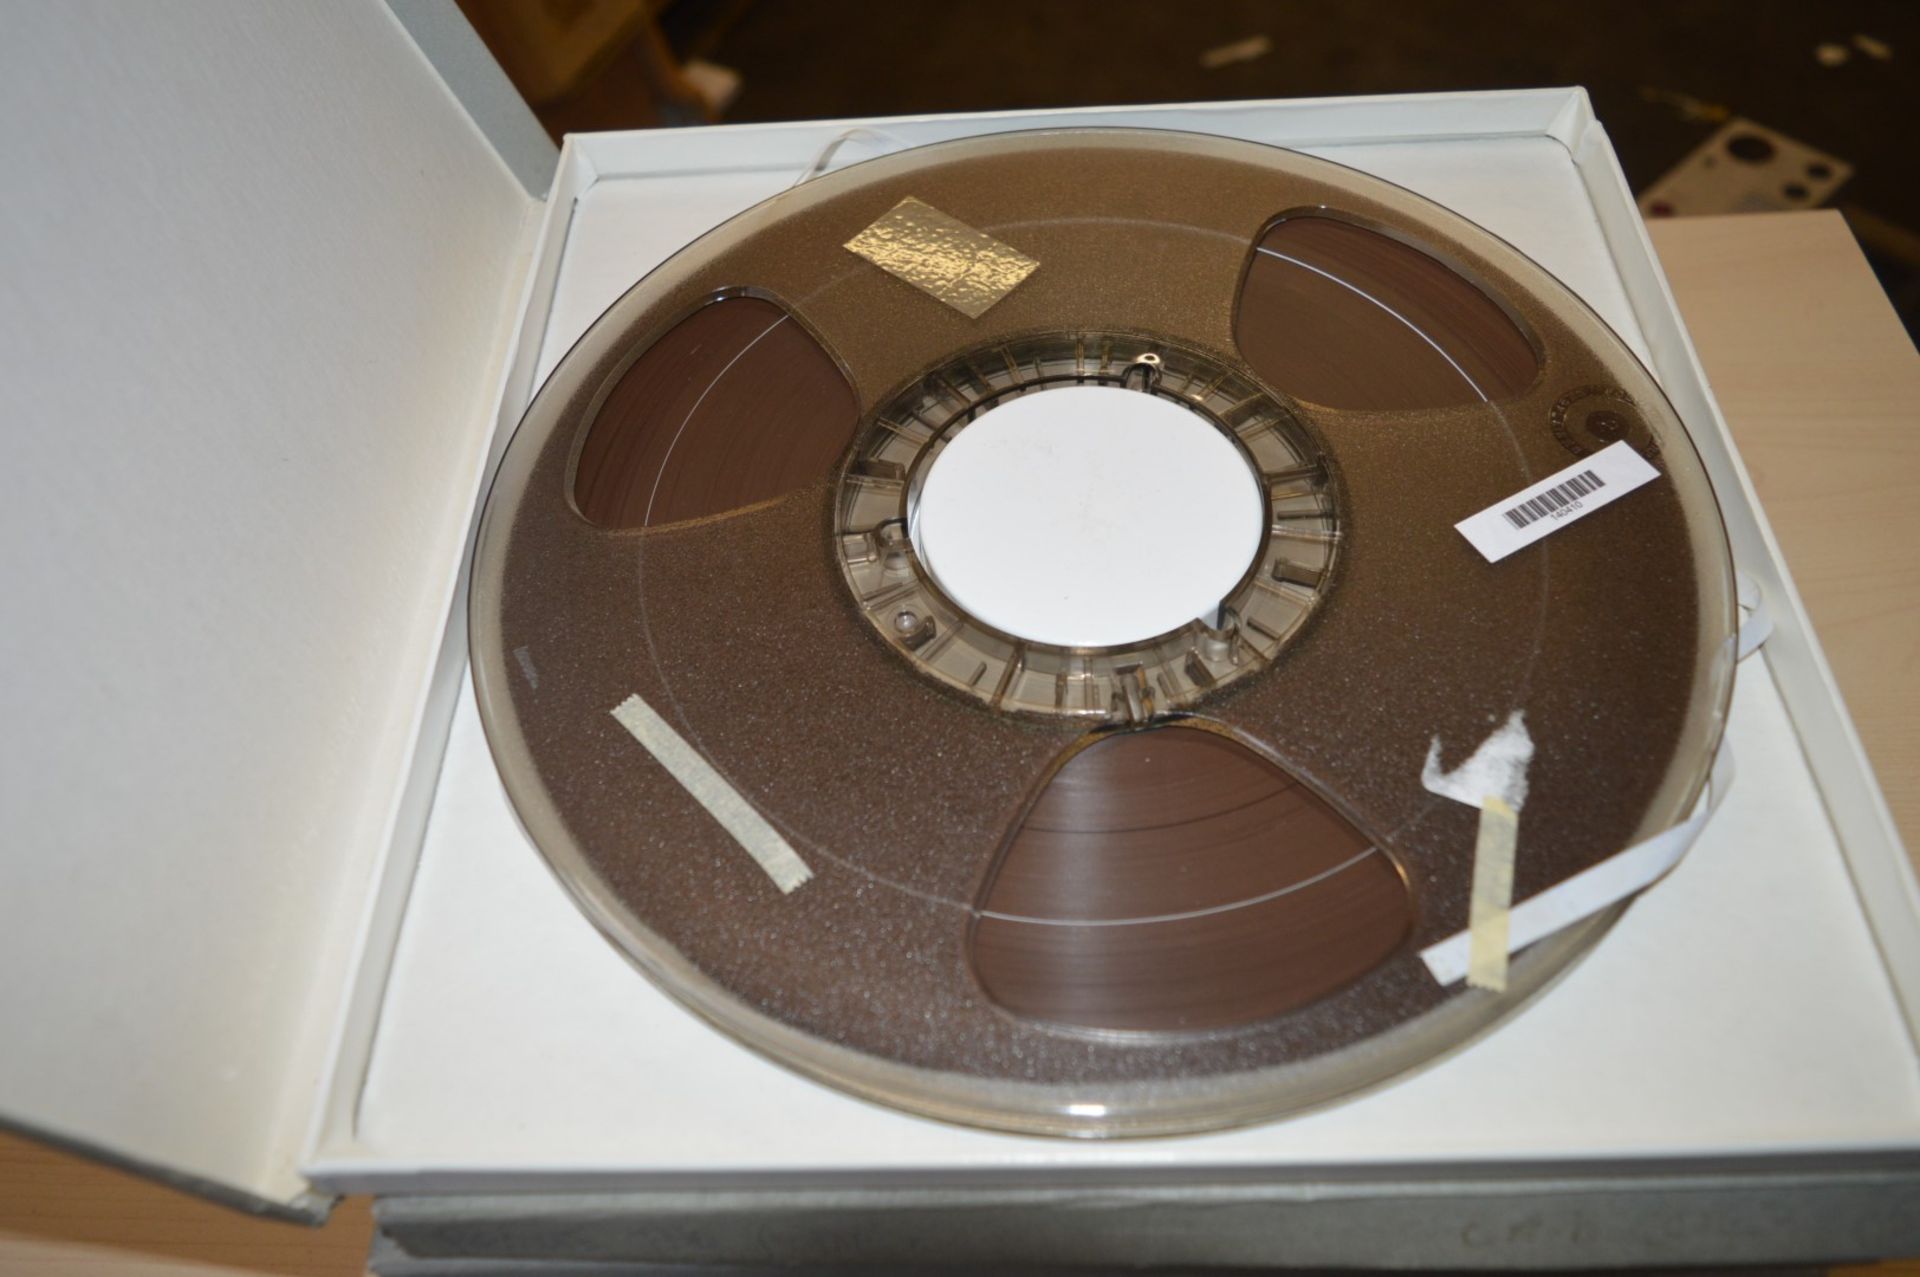 10 x Ampex 406 Reel to Reel Spools With Tape and Original Boxes - CL185 - Ref DRT0039 - Location: - Image 12 of 28